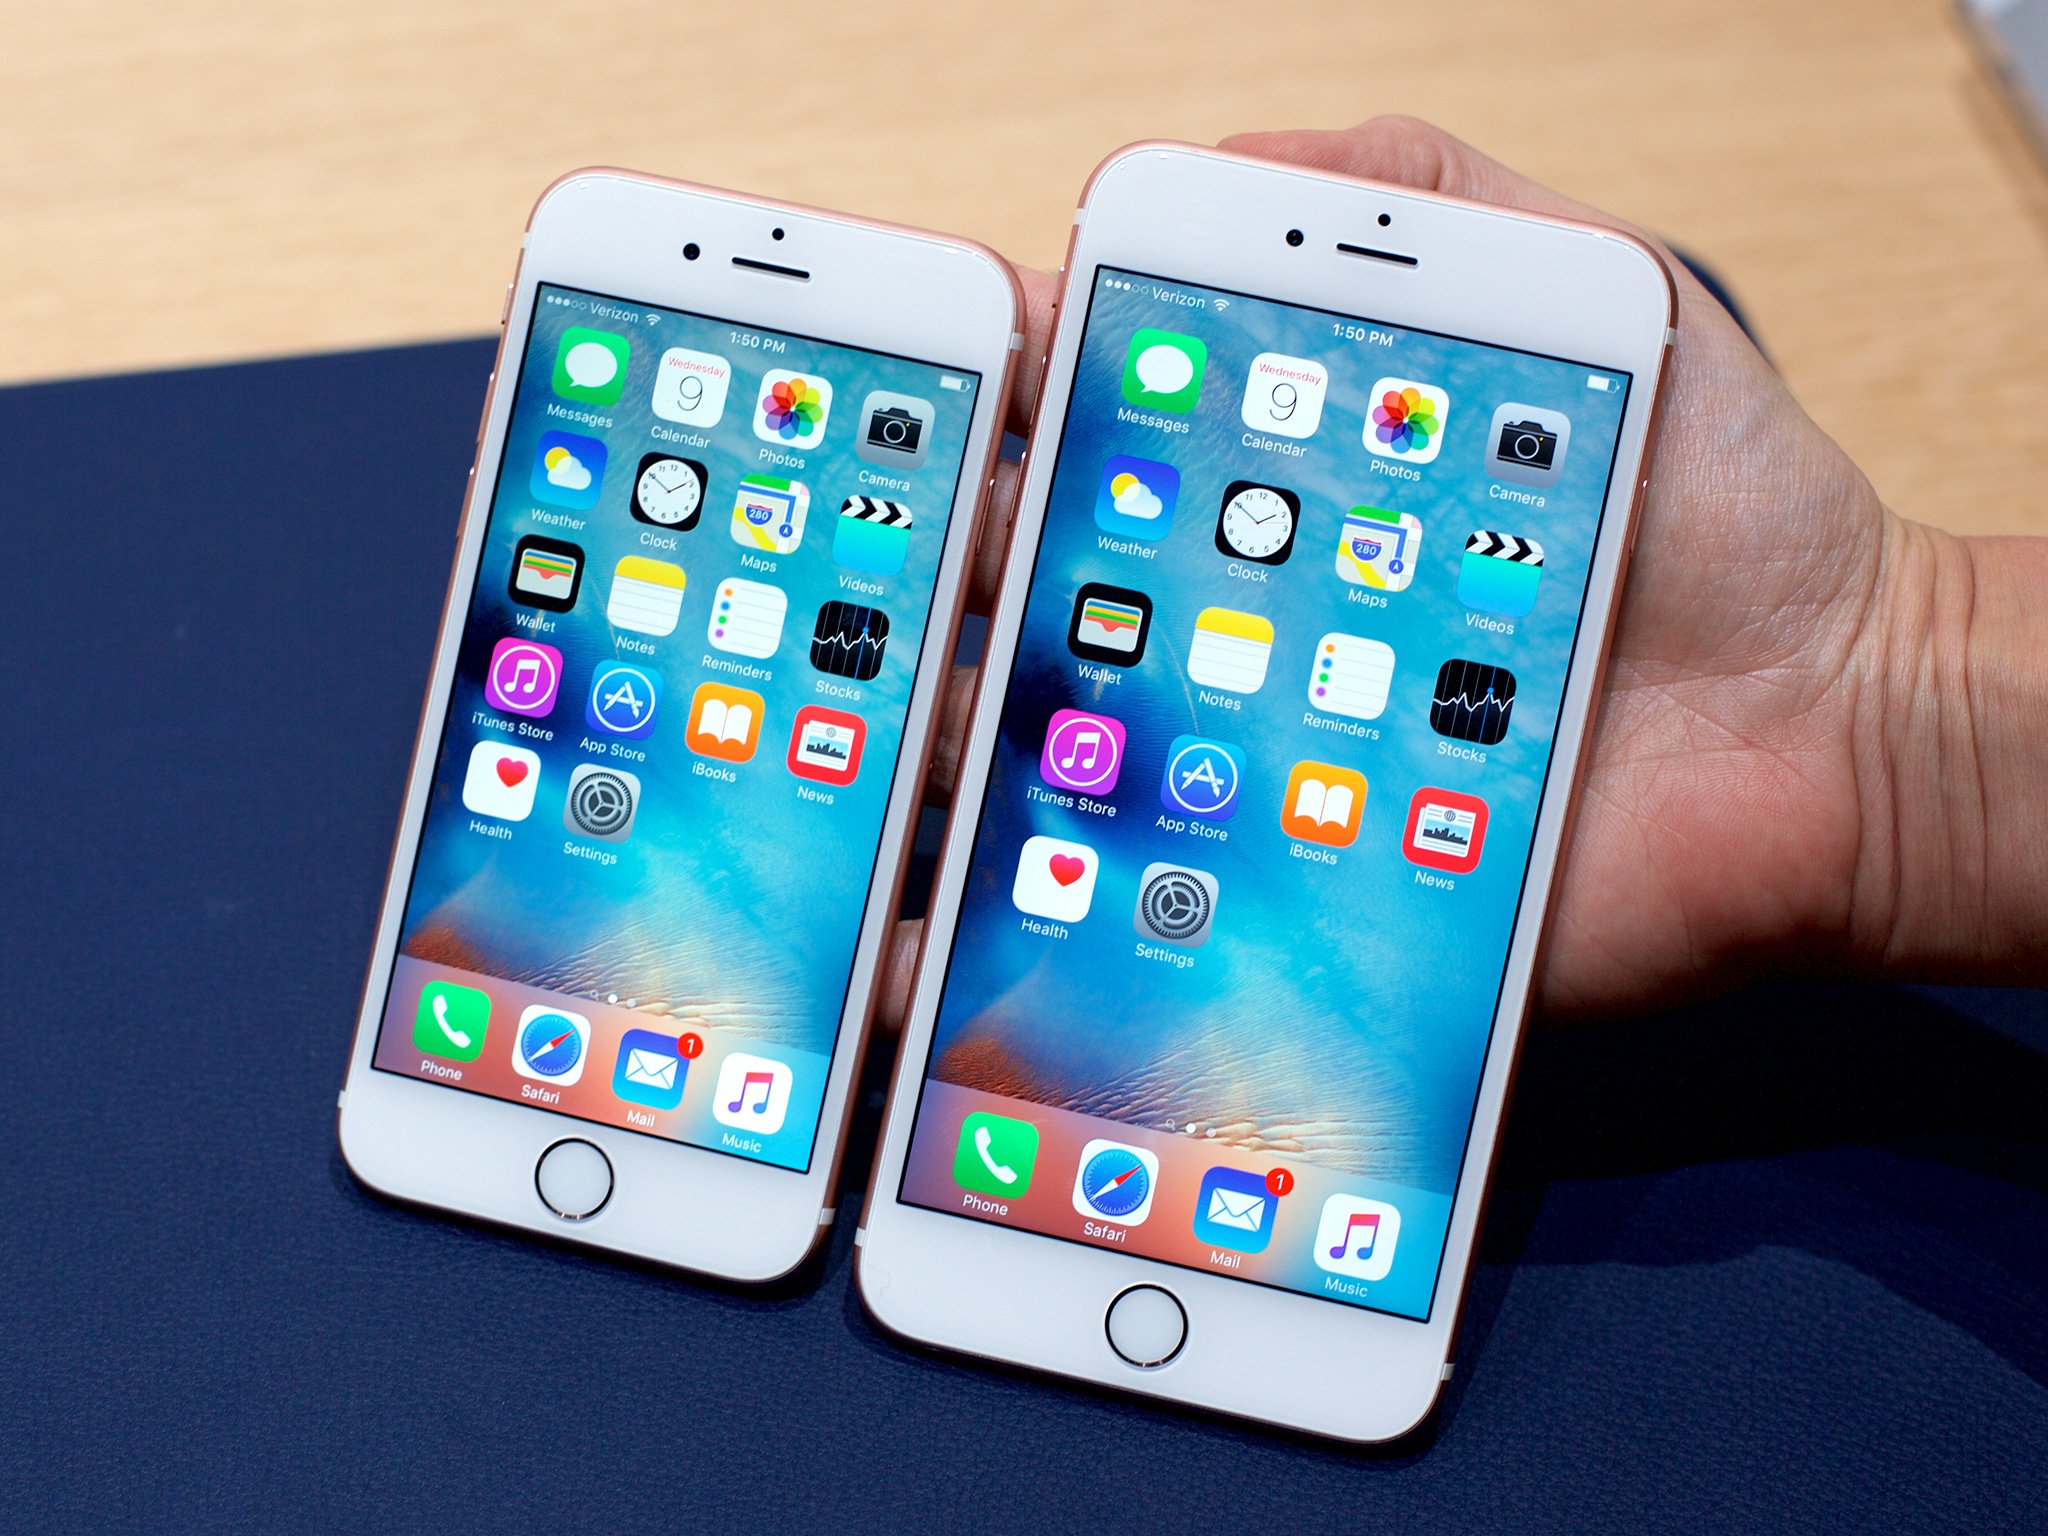 What size iPhone should you get: iPhone 6s or iPhone 6s Plus?